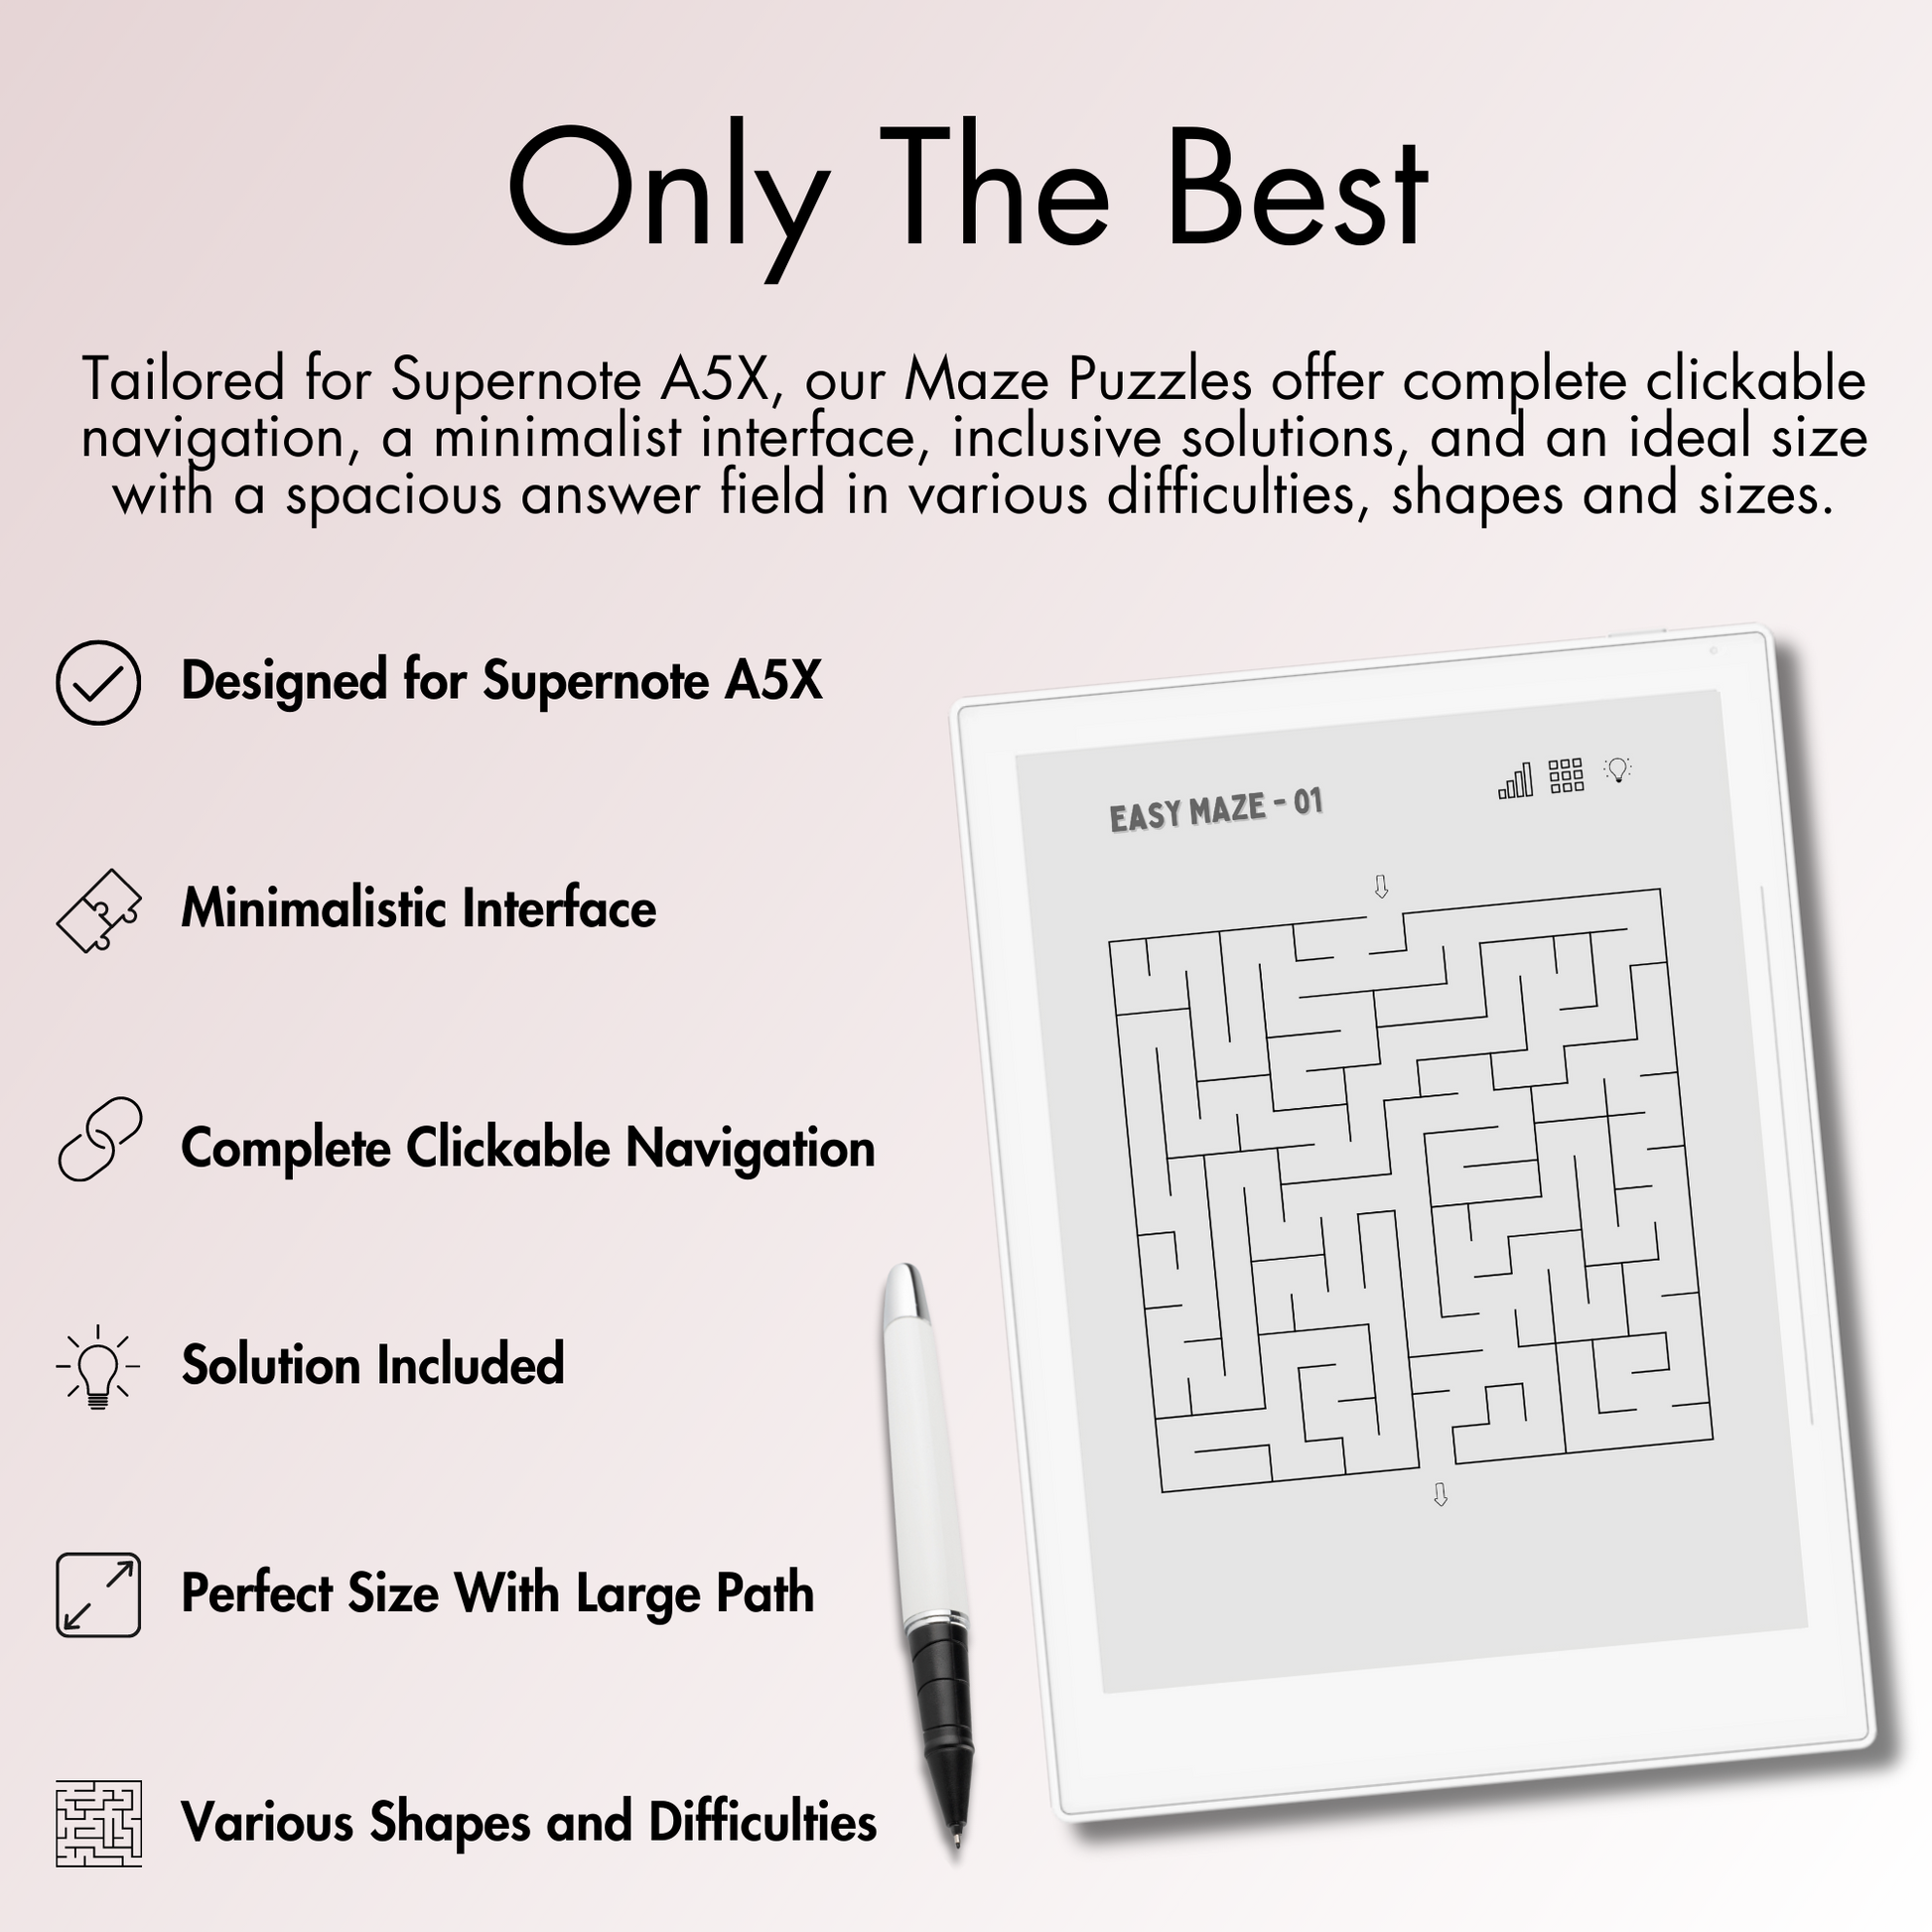 Our Maze Puzzles offer complete clickable navigation, a minimalist interface, inclusive solutions, and an ideal size with a spacious answer field for Supernote A5X and A6X E-Ink screen.